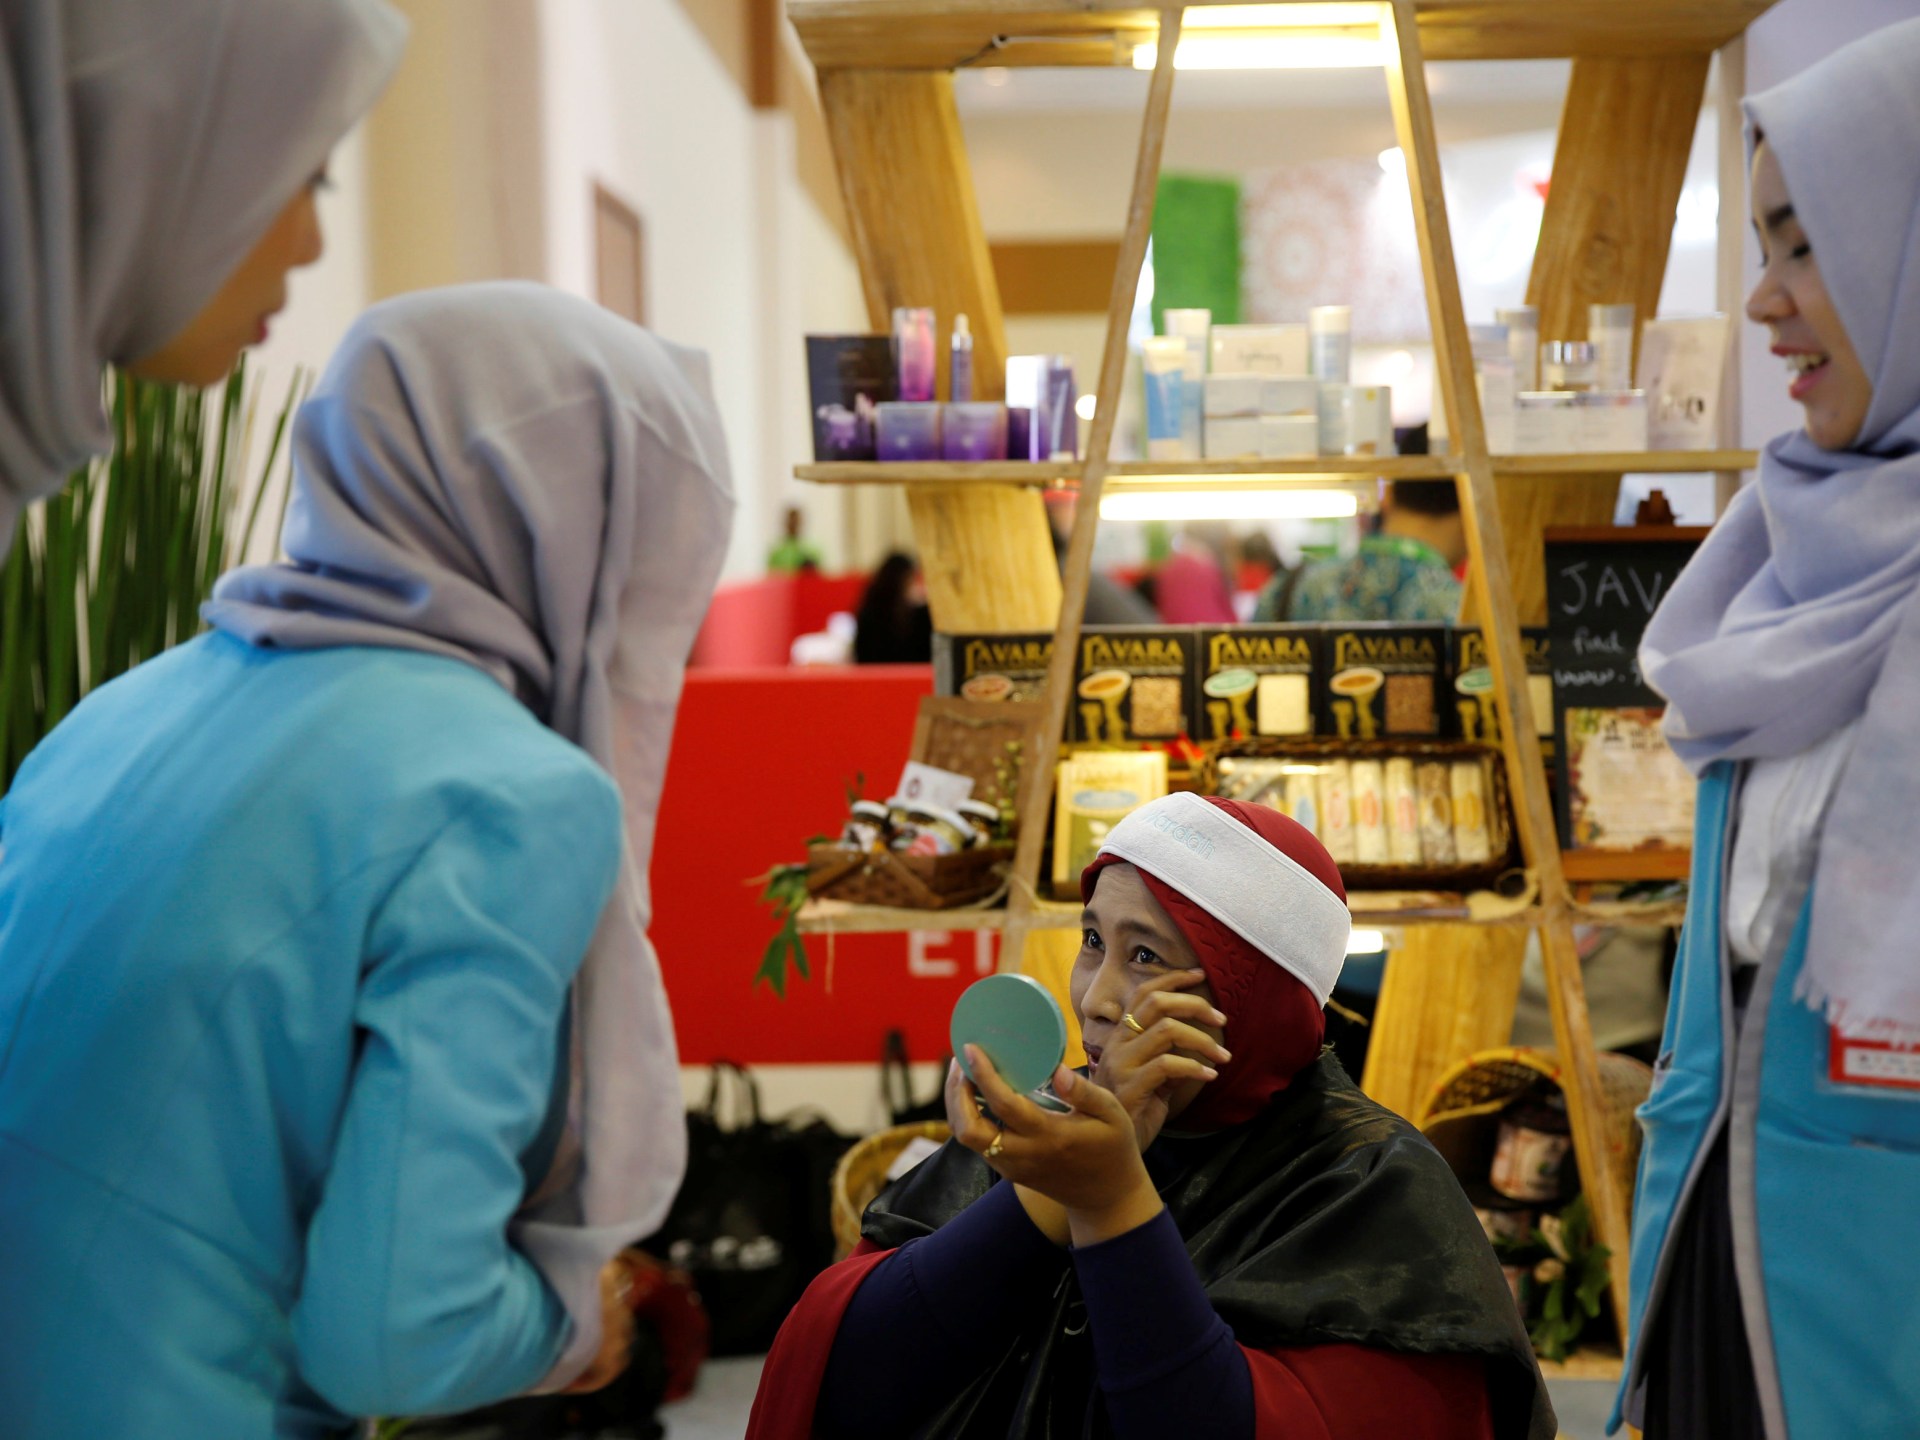 In Indonesia and Malaysia, beauty is big business during Eid al-Fitr